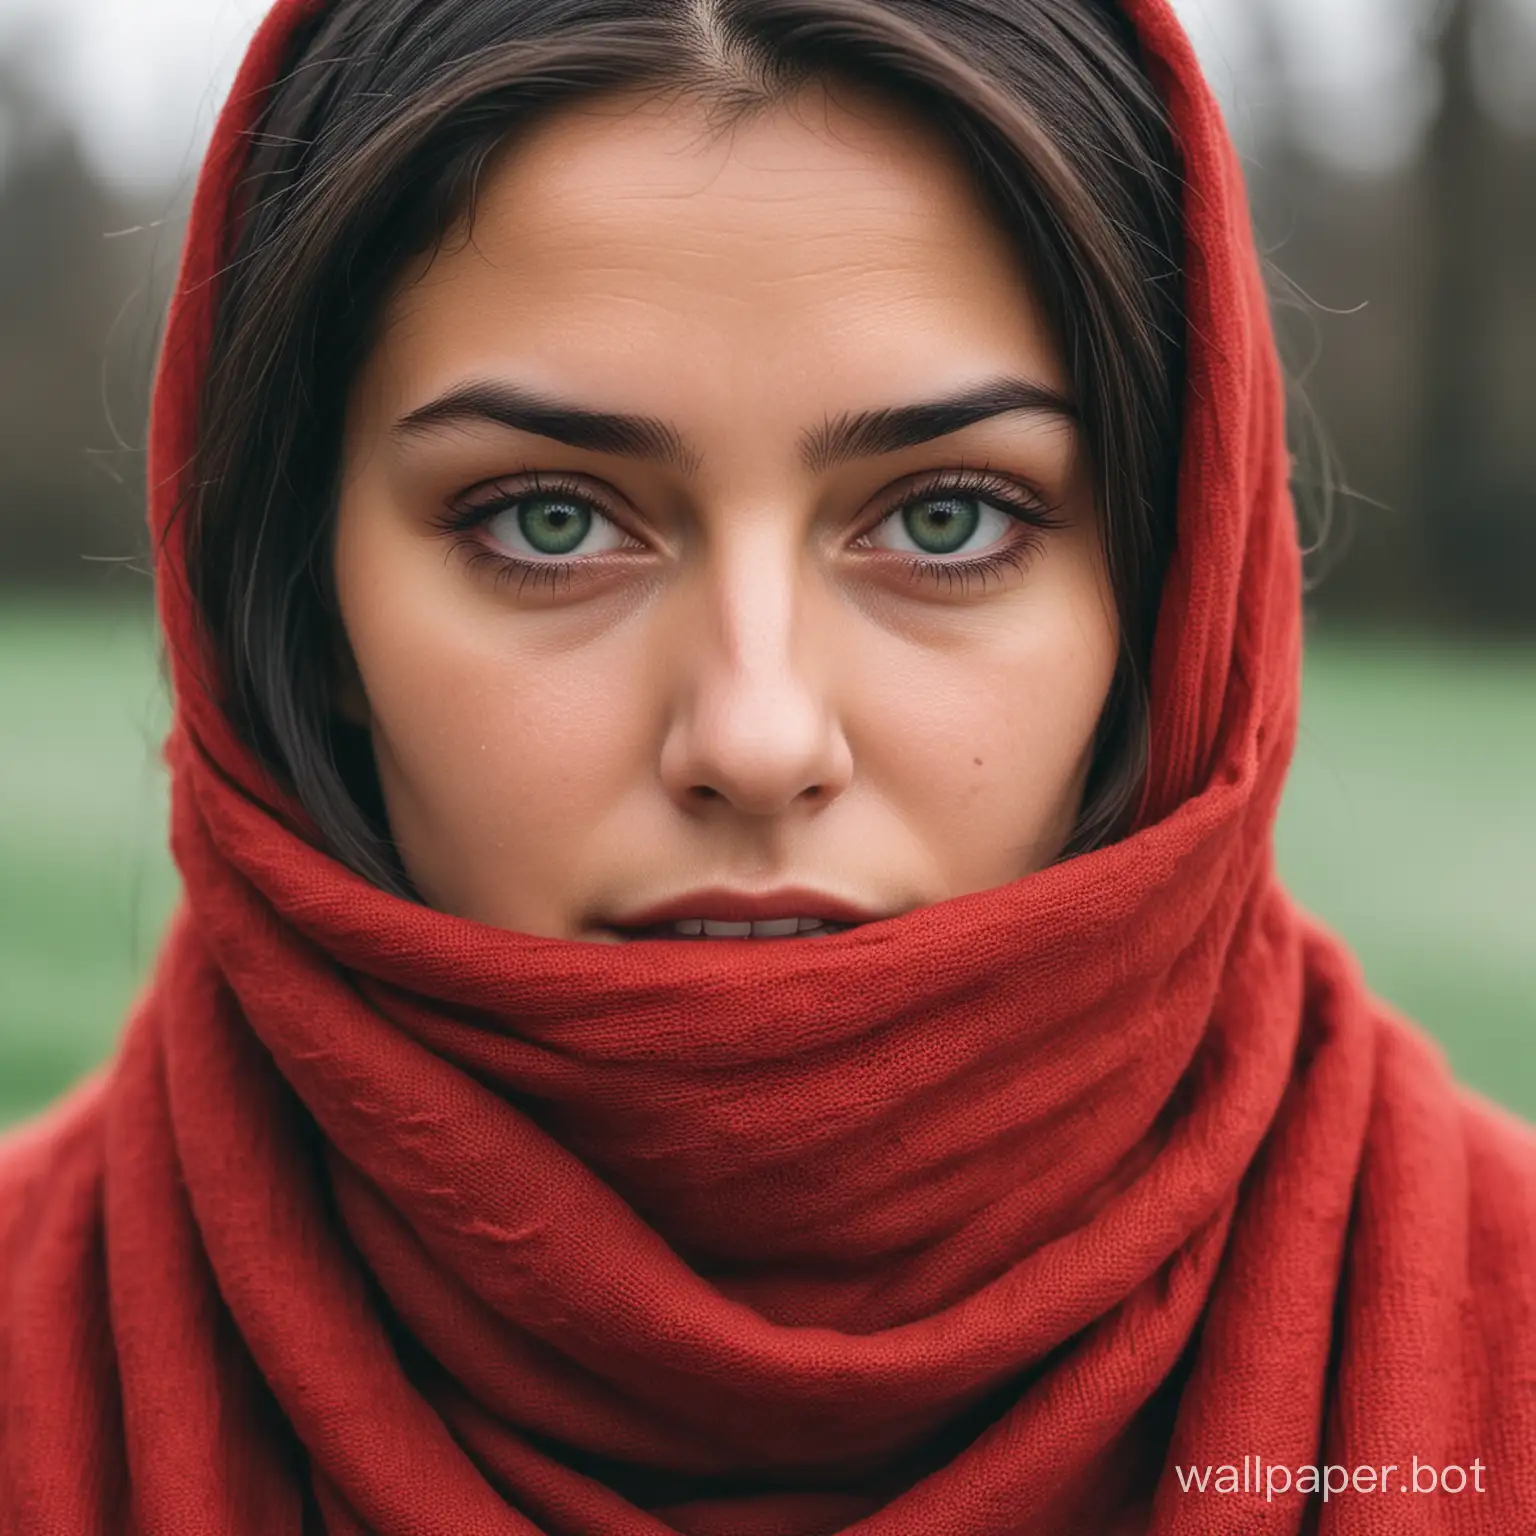 WeatherWorn-Woman-with-Red-Shawl-and-Green-Eyes-Staring